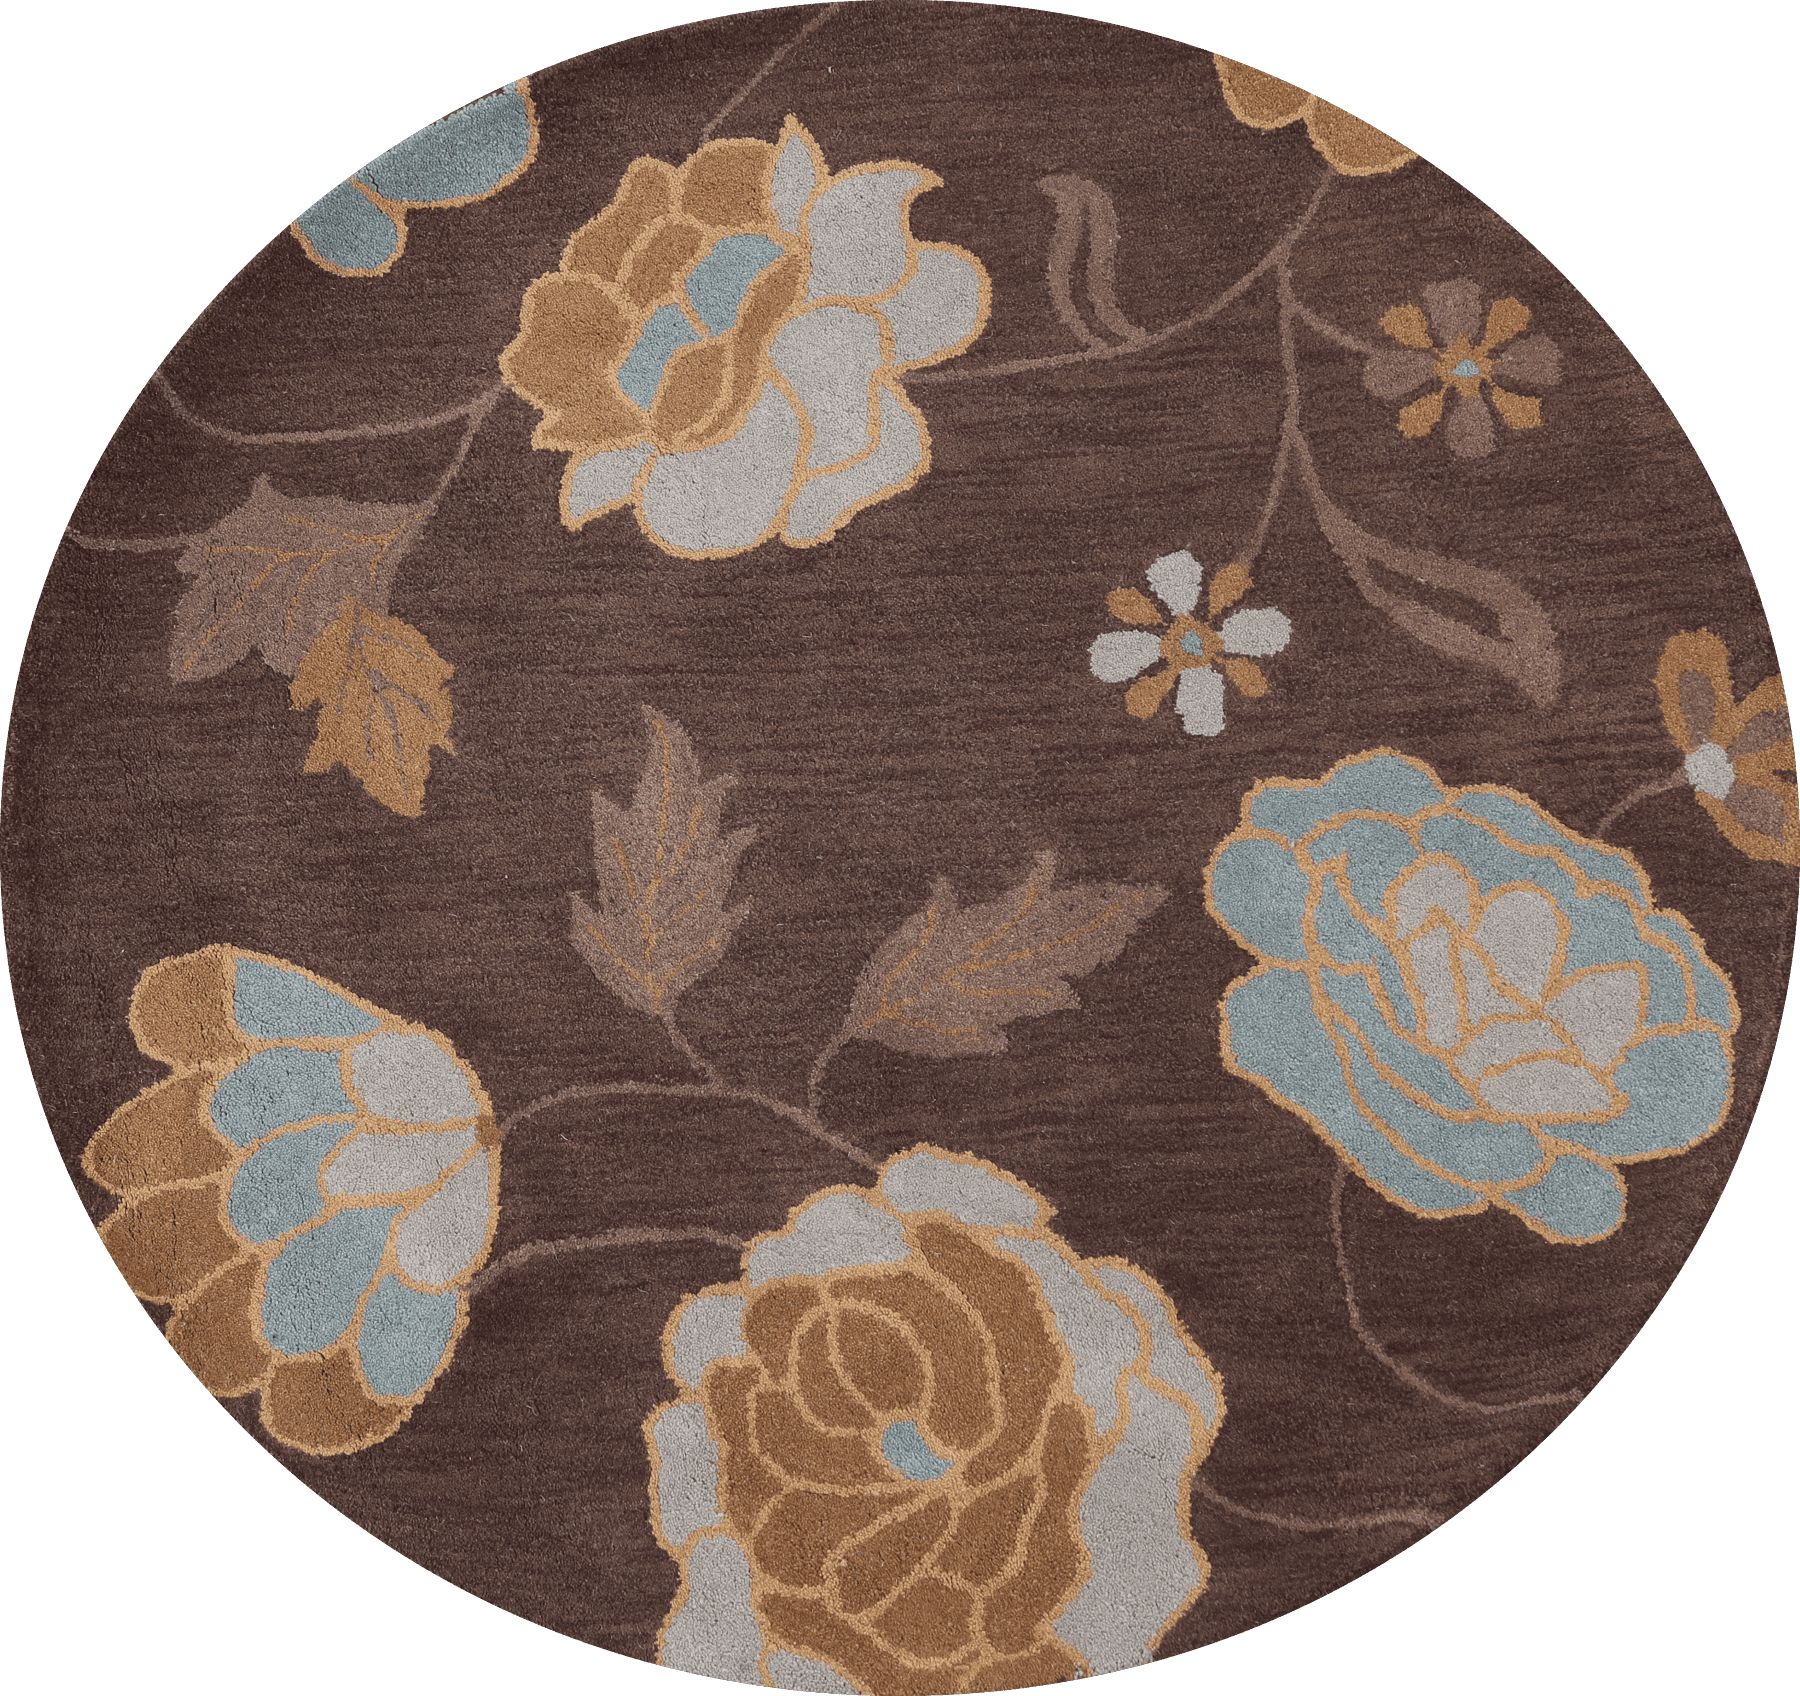 Brown Traditional Floral Oriental Area Rug Hand-Tufted Wool 5x5 ft Round Carpet 